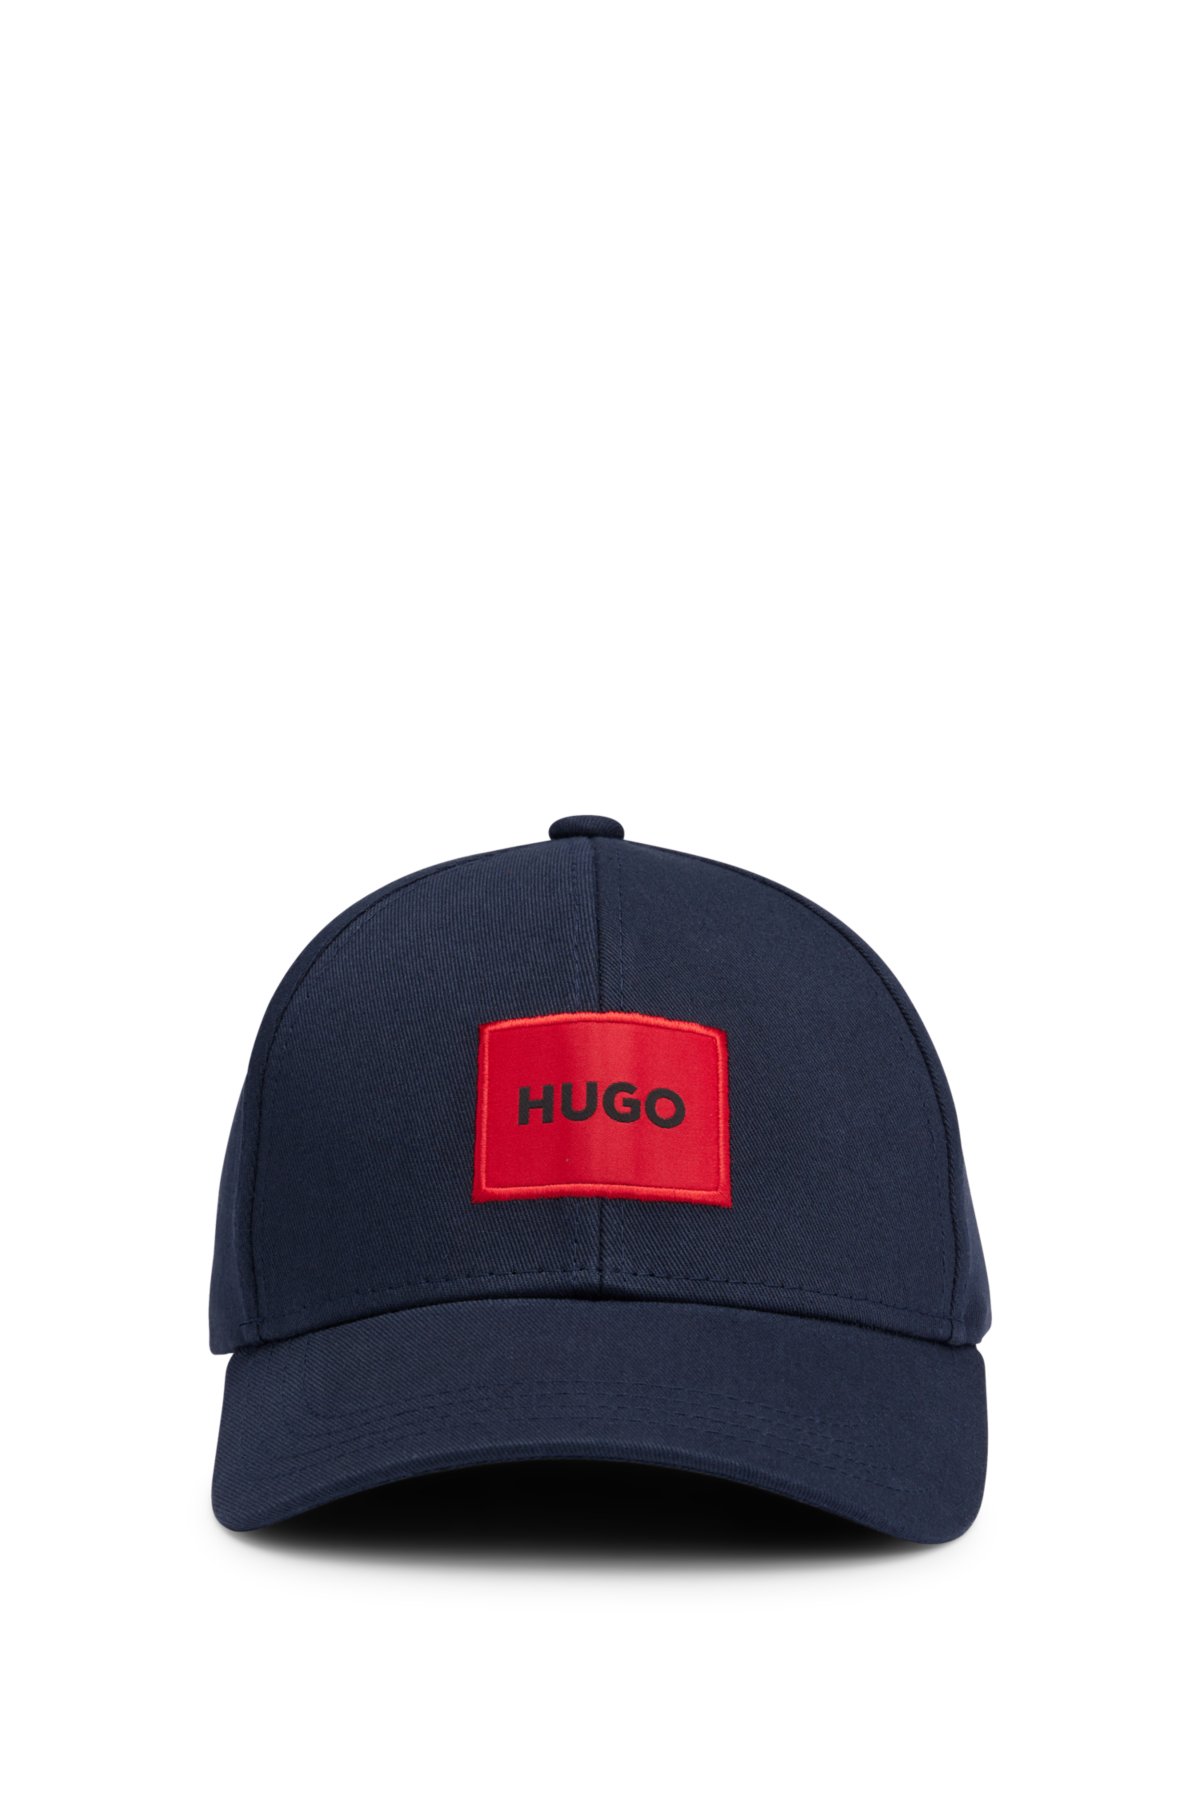 cap red label with Cotton-twill HUGO - logo